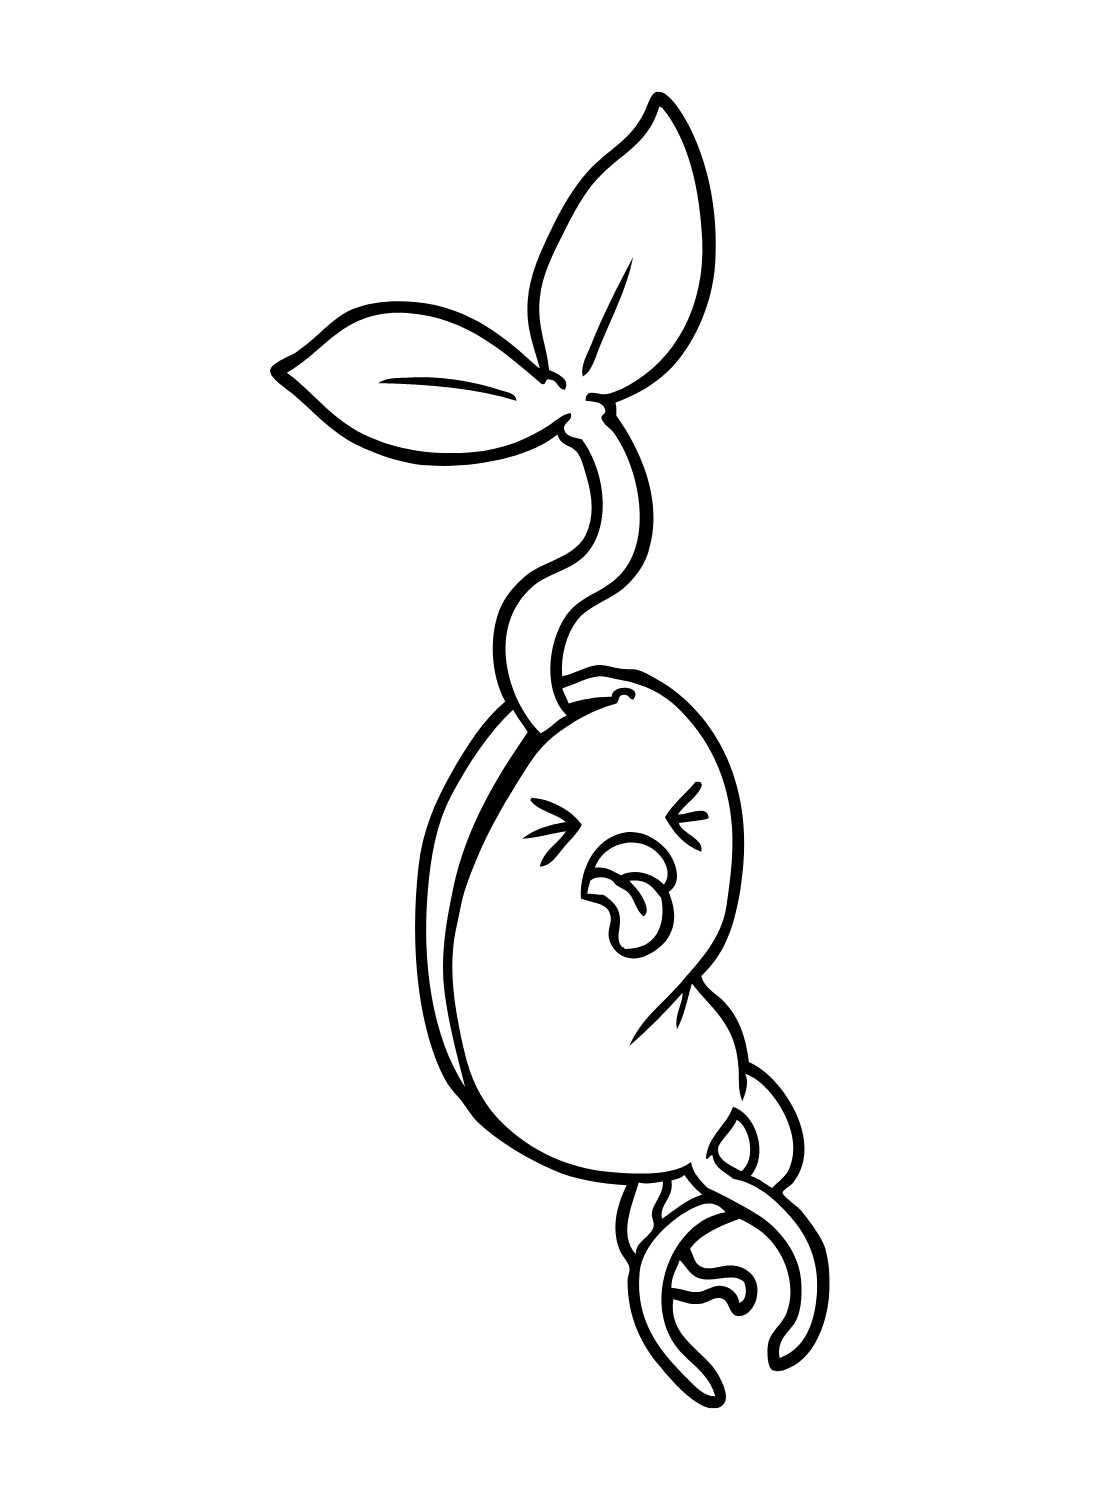 Cartoon Bean Sprouts Coloring Page